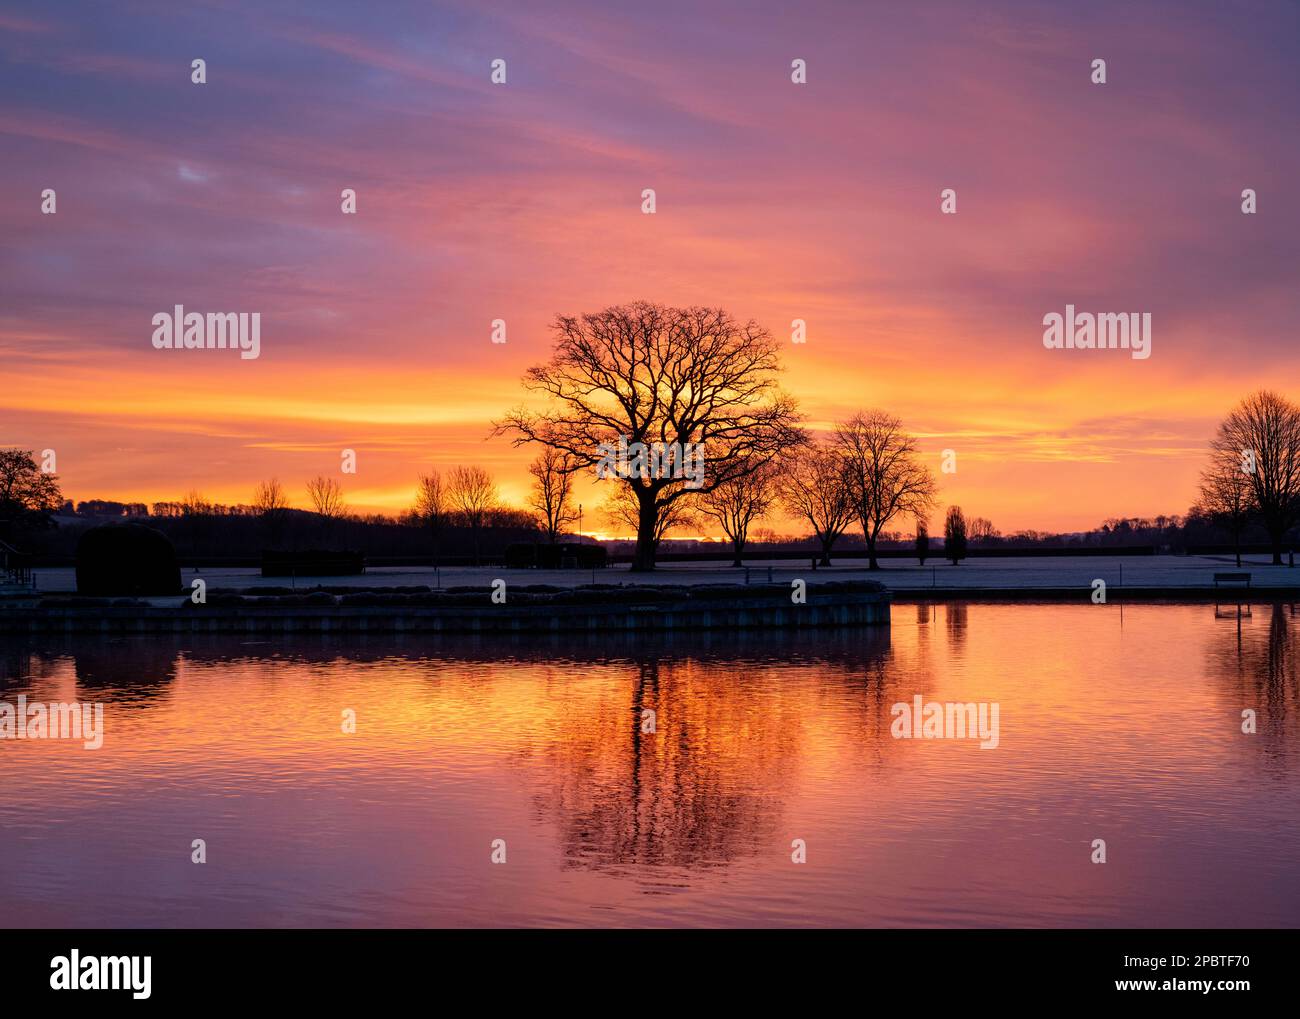 Sonnenaufgang an der Themse. Henley on Thames, Oxfordshire, England Stockfoto